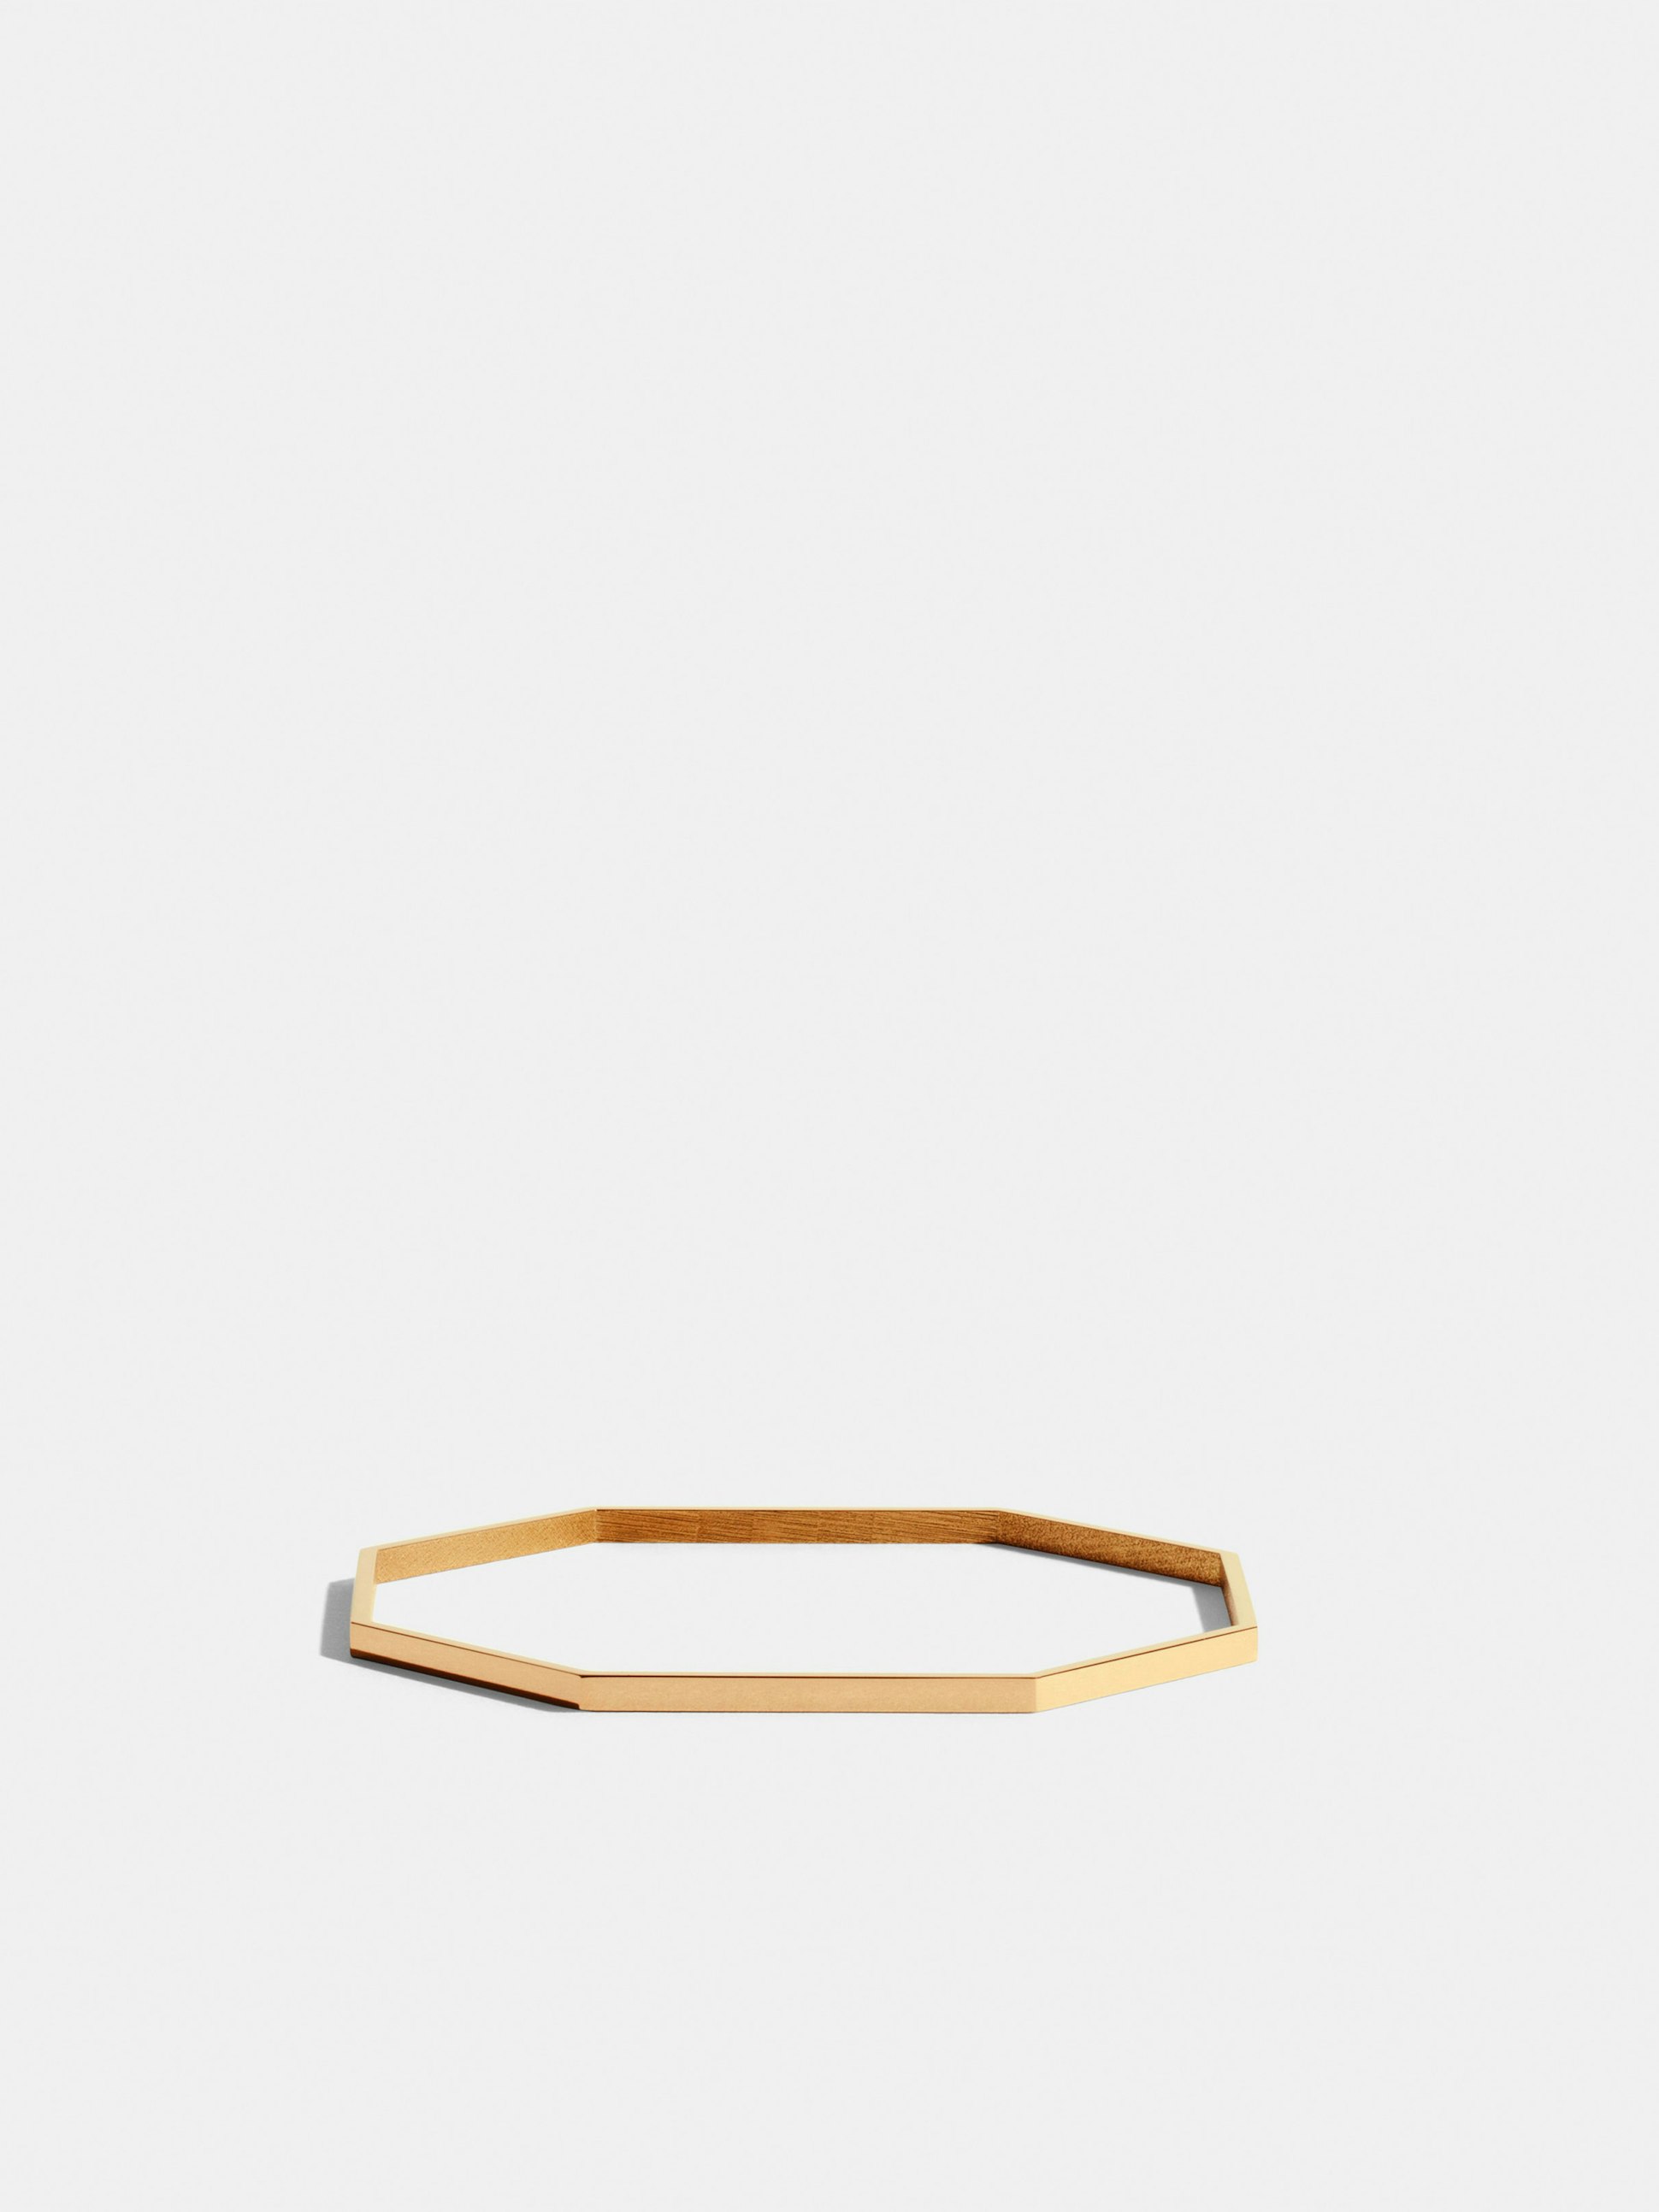 Octogone simple bangle in 18k Fairmined ethical yellow gold